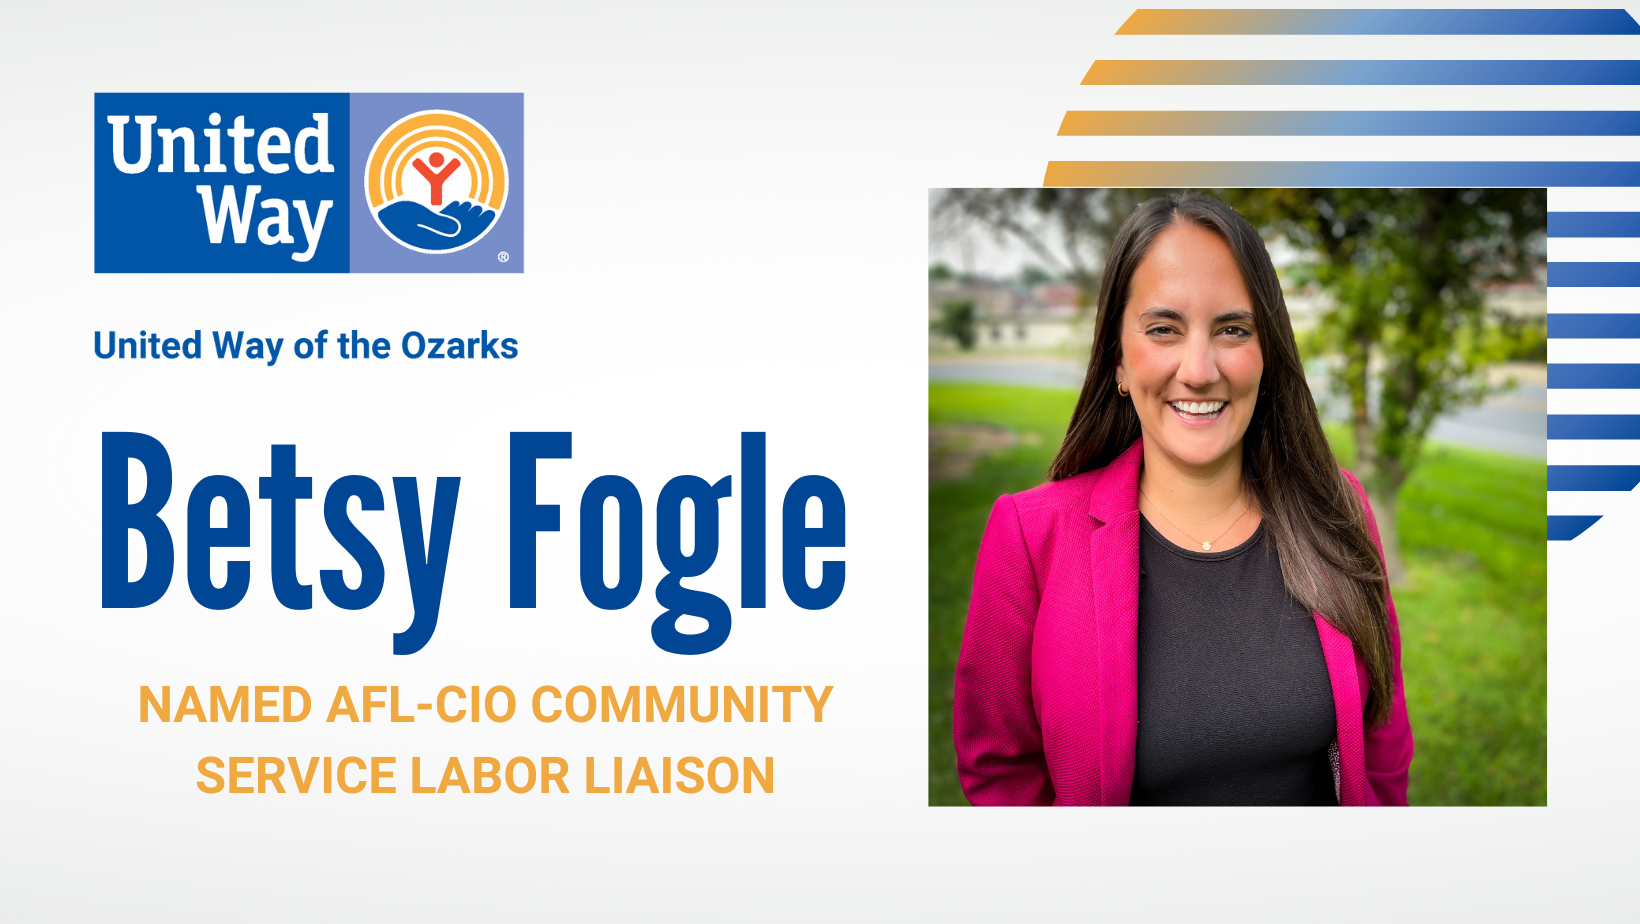 Featured image for “Betsy Fogle named AFL-CIO Community Service Labor Liaison”